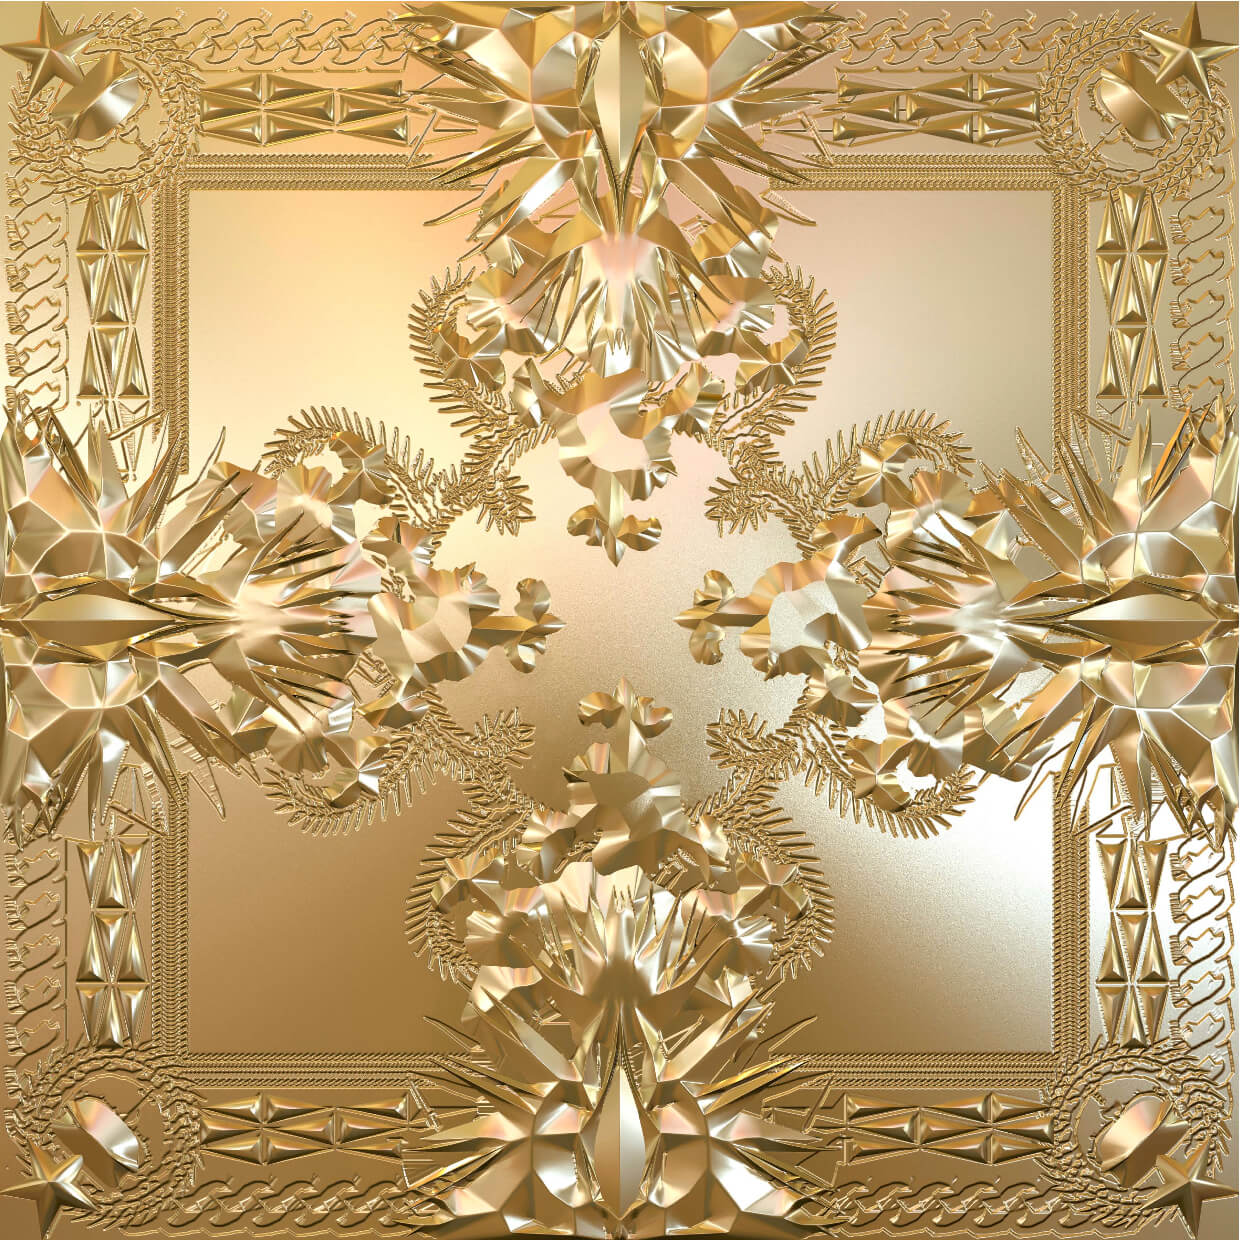 kanye west watch the throne live